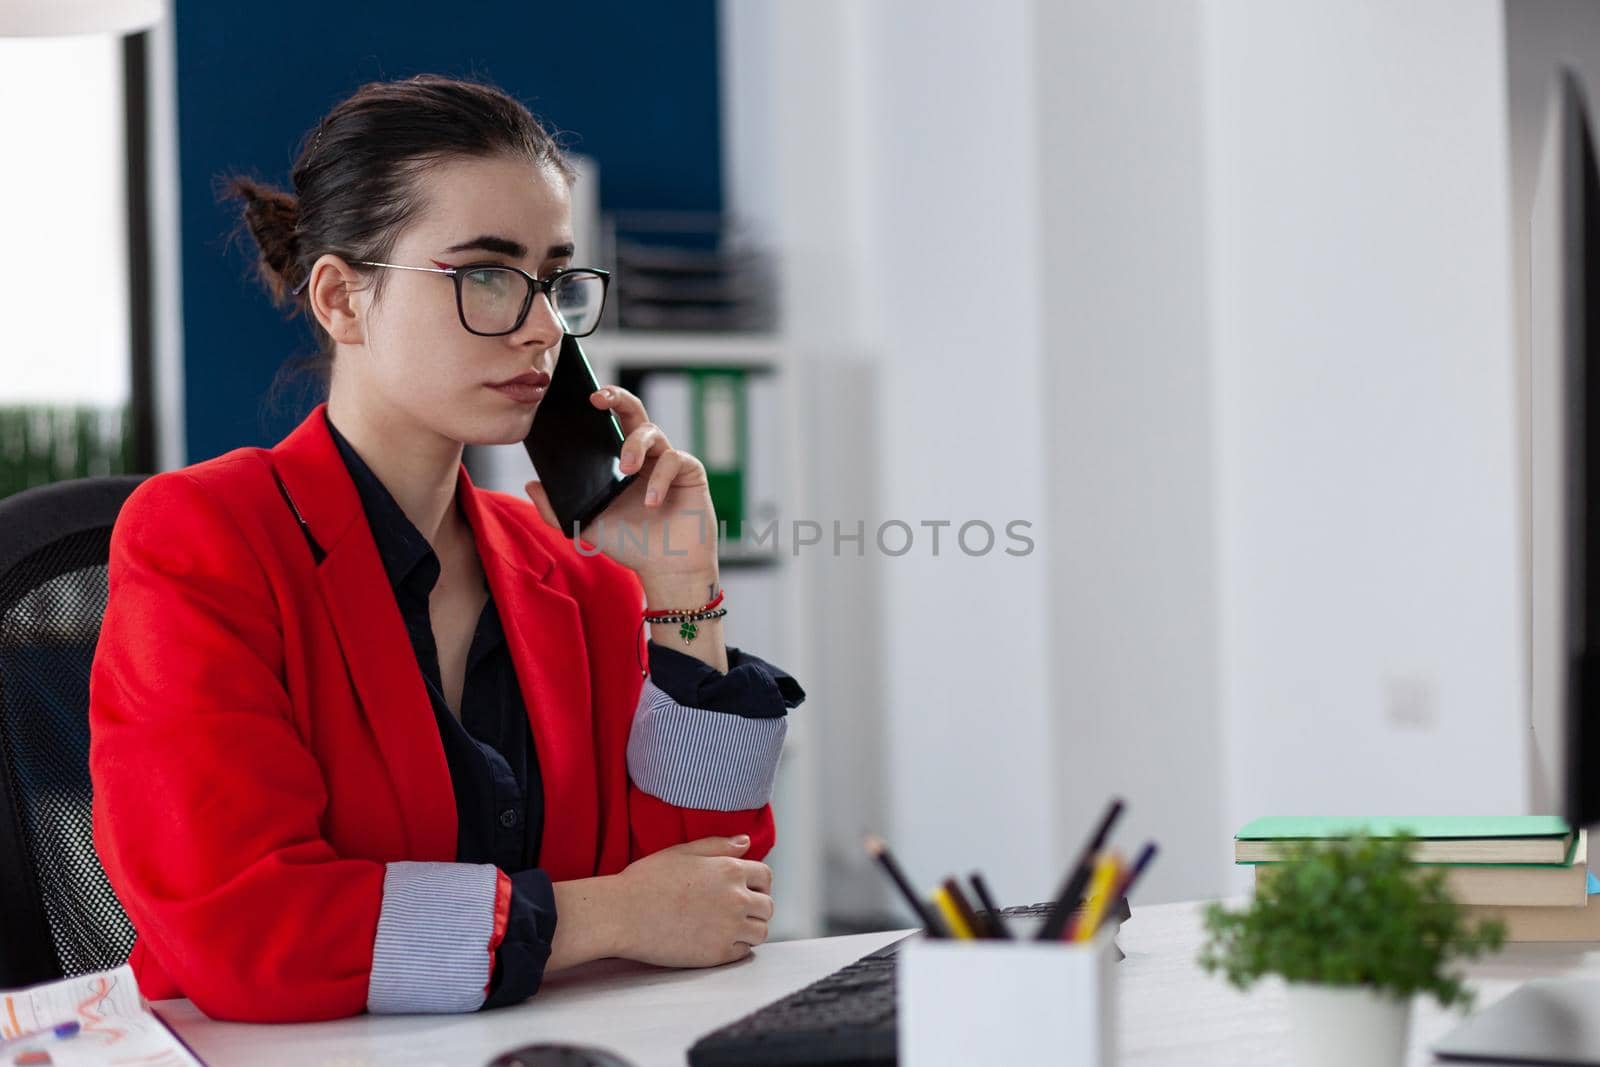 Businesswoman in office workplace privide help consulting client, distantly by mobile phone. Entrepreneur looking at document on computer screen. during phone conversation.